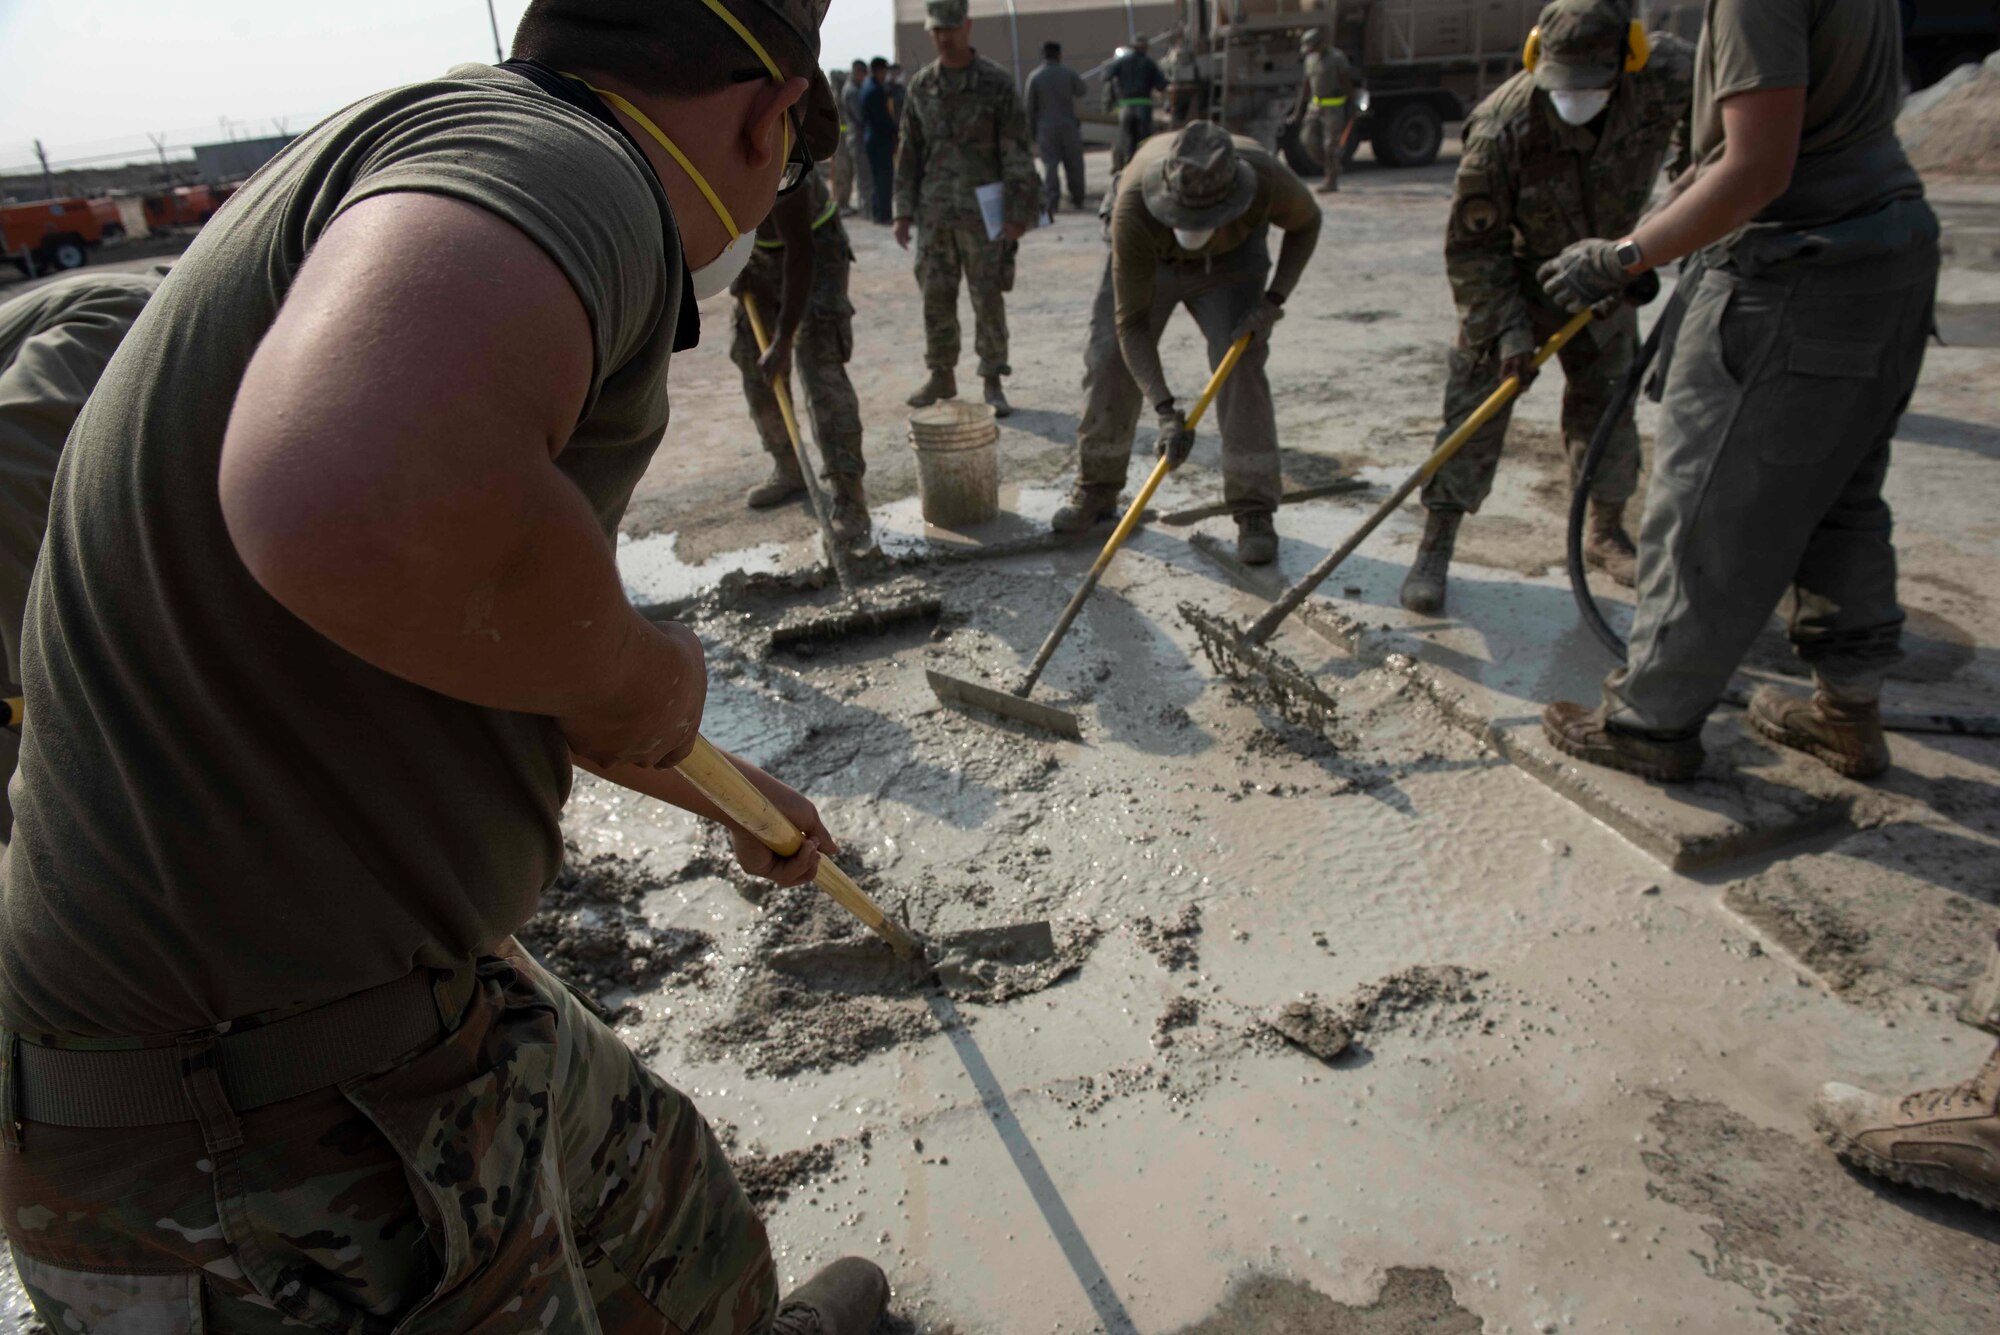 U.S. Air Force Airmen from the 386th Expeditionary Civil Engineer Squadron spread out rapid set concrete during a Rapid Airfield Damage Recovery training exercise at Ali Al Salem Air Base, Kuwait, Nov. 16, 2020. After being repaired, the patch can tolerate thousands of aircraft passes, allowing the flying mission to continue unimpeded. (U.S. Air Force photo by Staff Sgt. Kenneth Boyton)